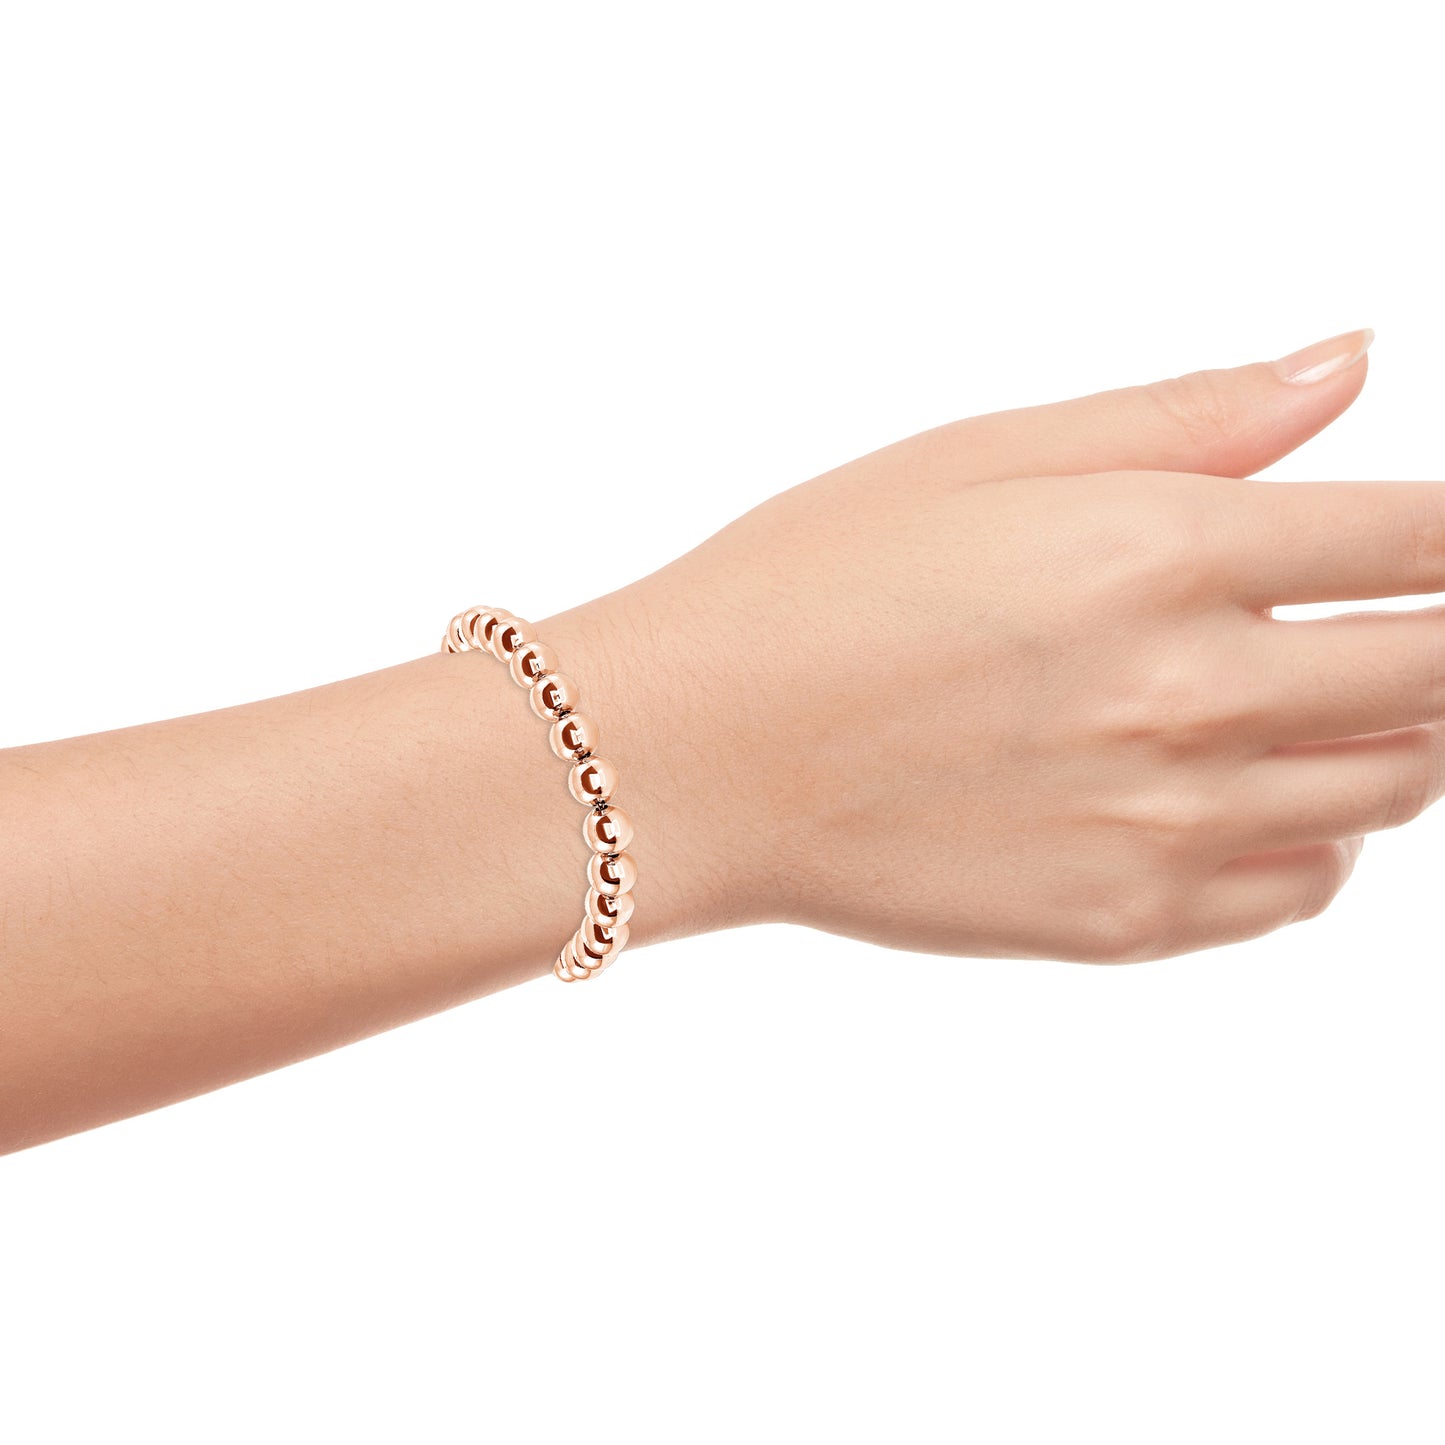 ITBALL20-RG. Silver 925 Rose Gold Plated Ball 8 mm. Bracelet